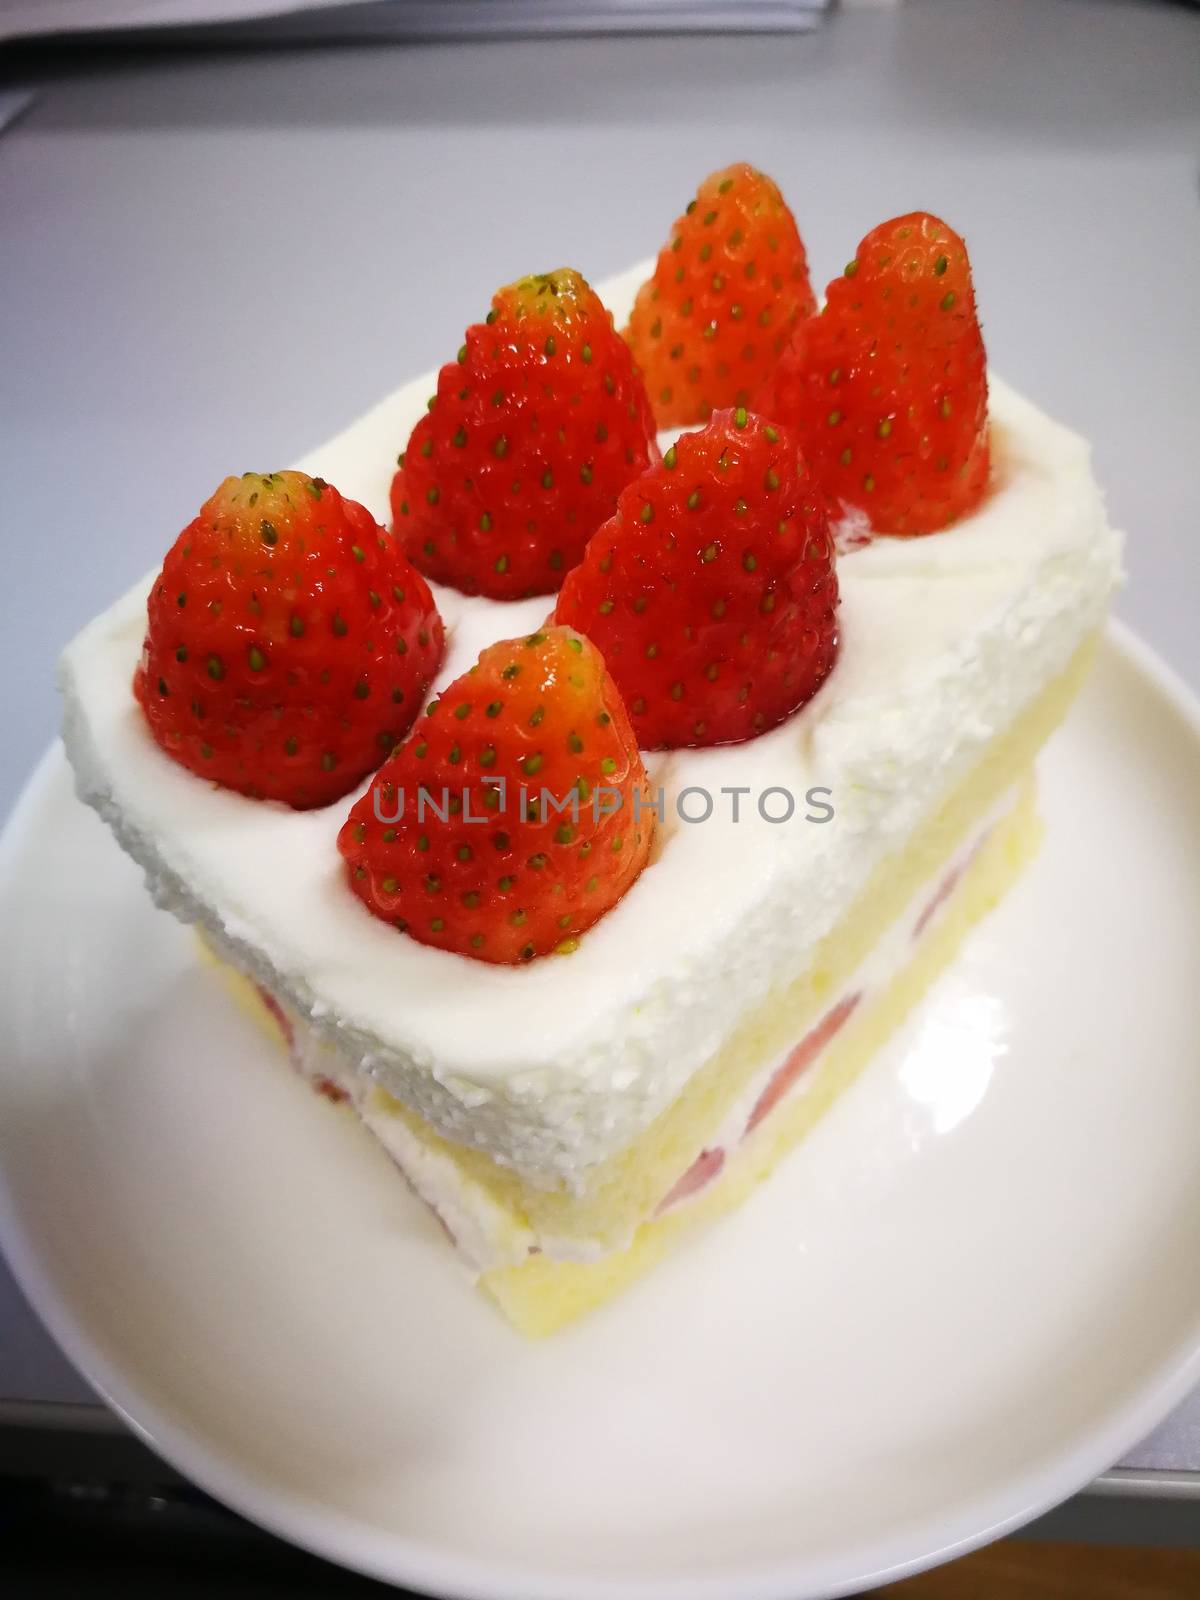 strawberries mouse cake  sweet homemade cake of  Thailand desser by shatchaya